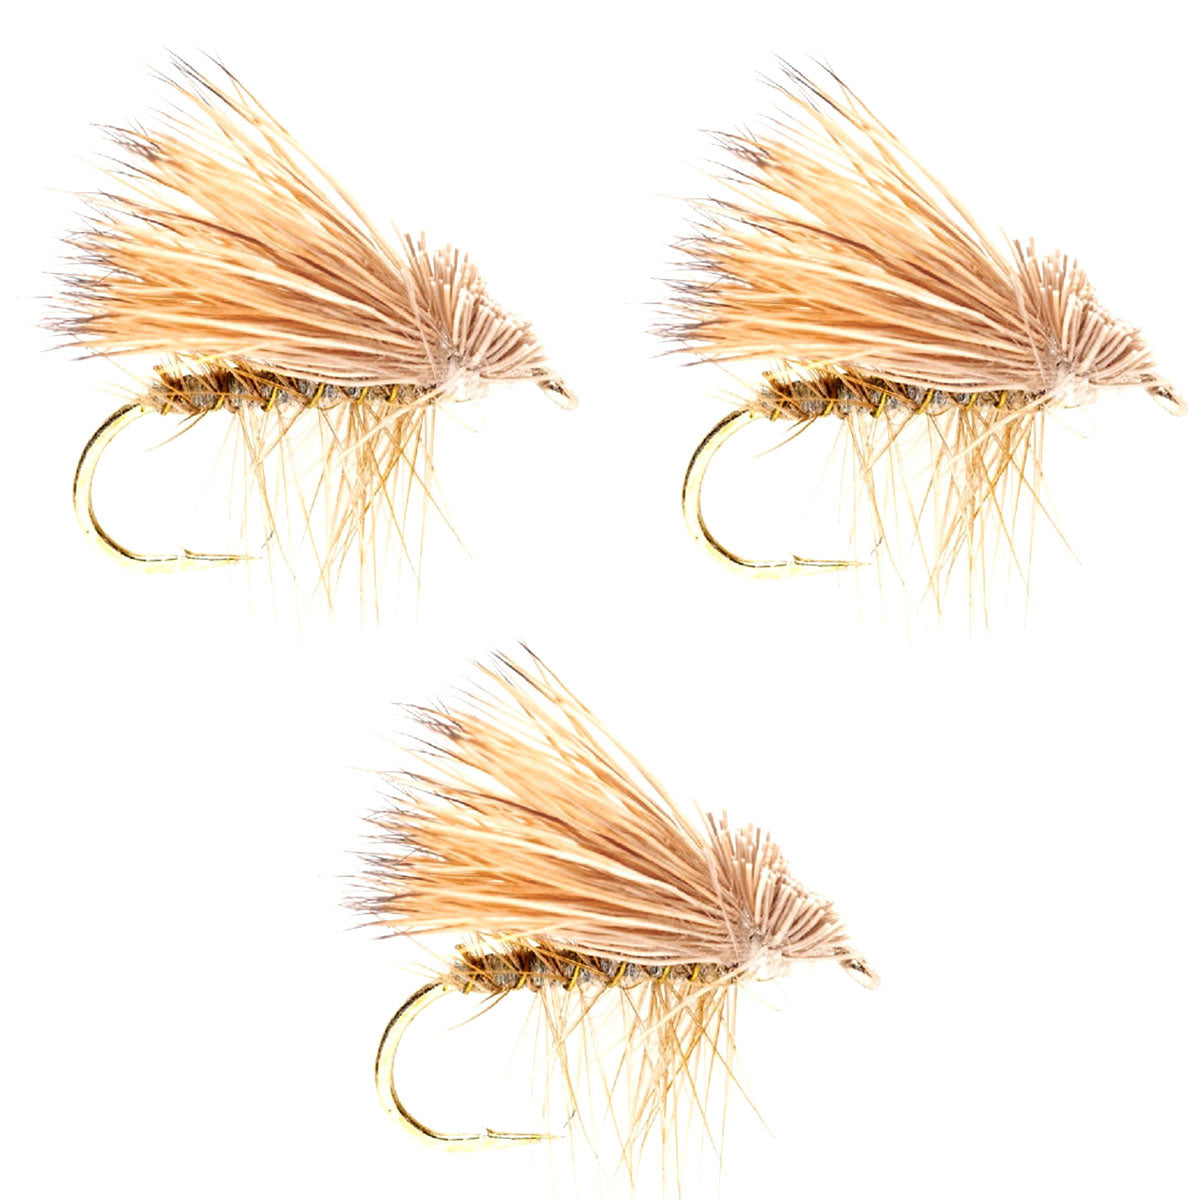 3 Pack Yellow Elk Hair Caddis Classic Trout Dry Flies Size 16